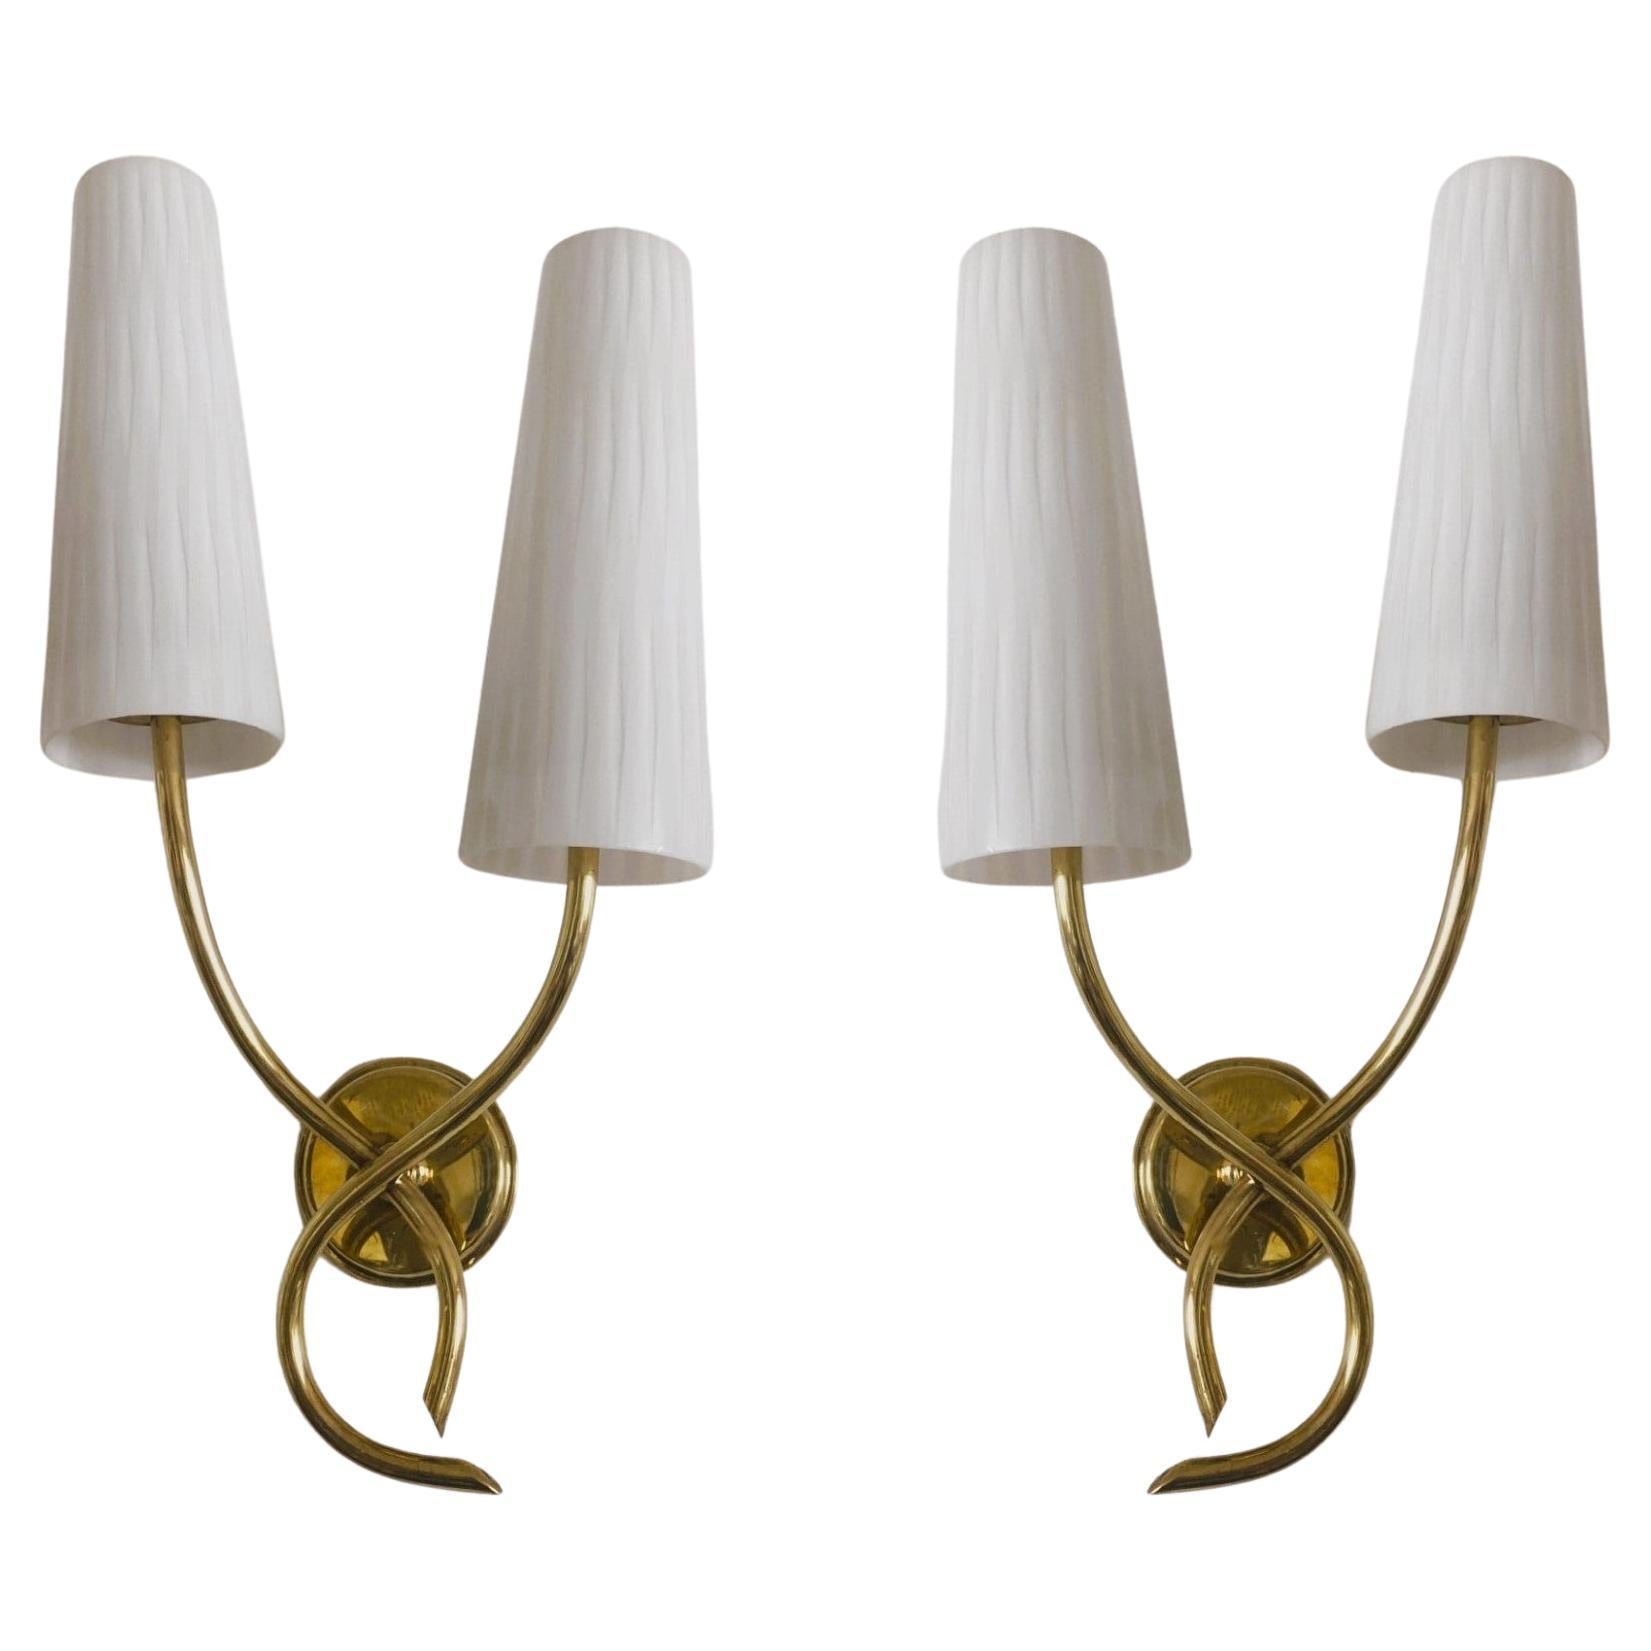 Pair of French Maison Lunel Brass Opal Glass Two-Light Wall Sconces, 1950s For Sale